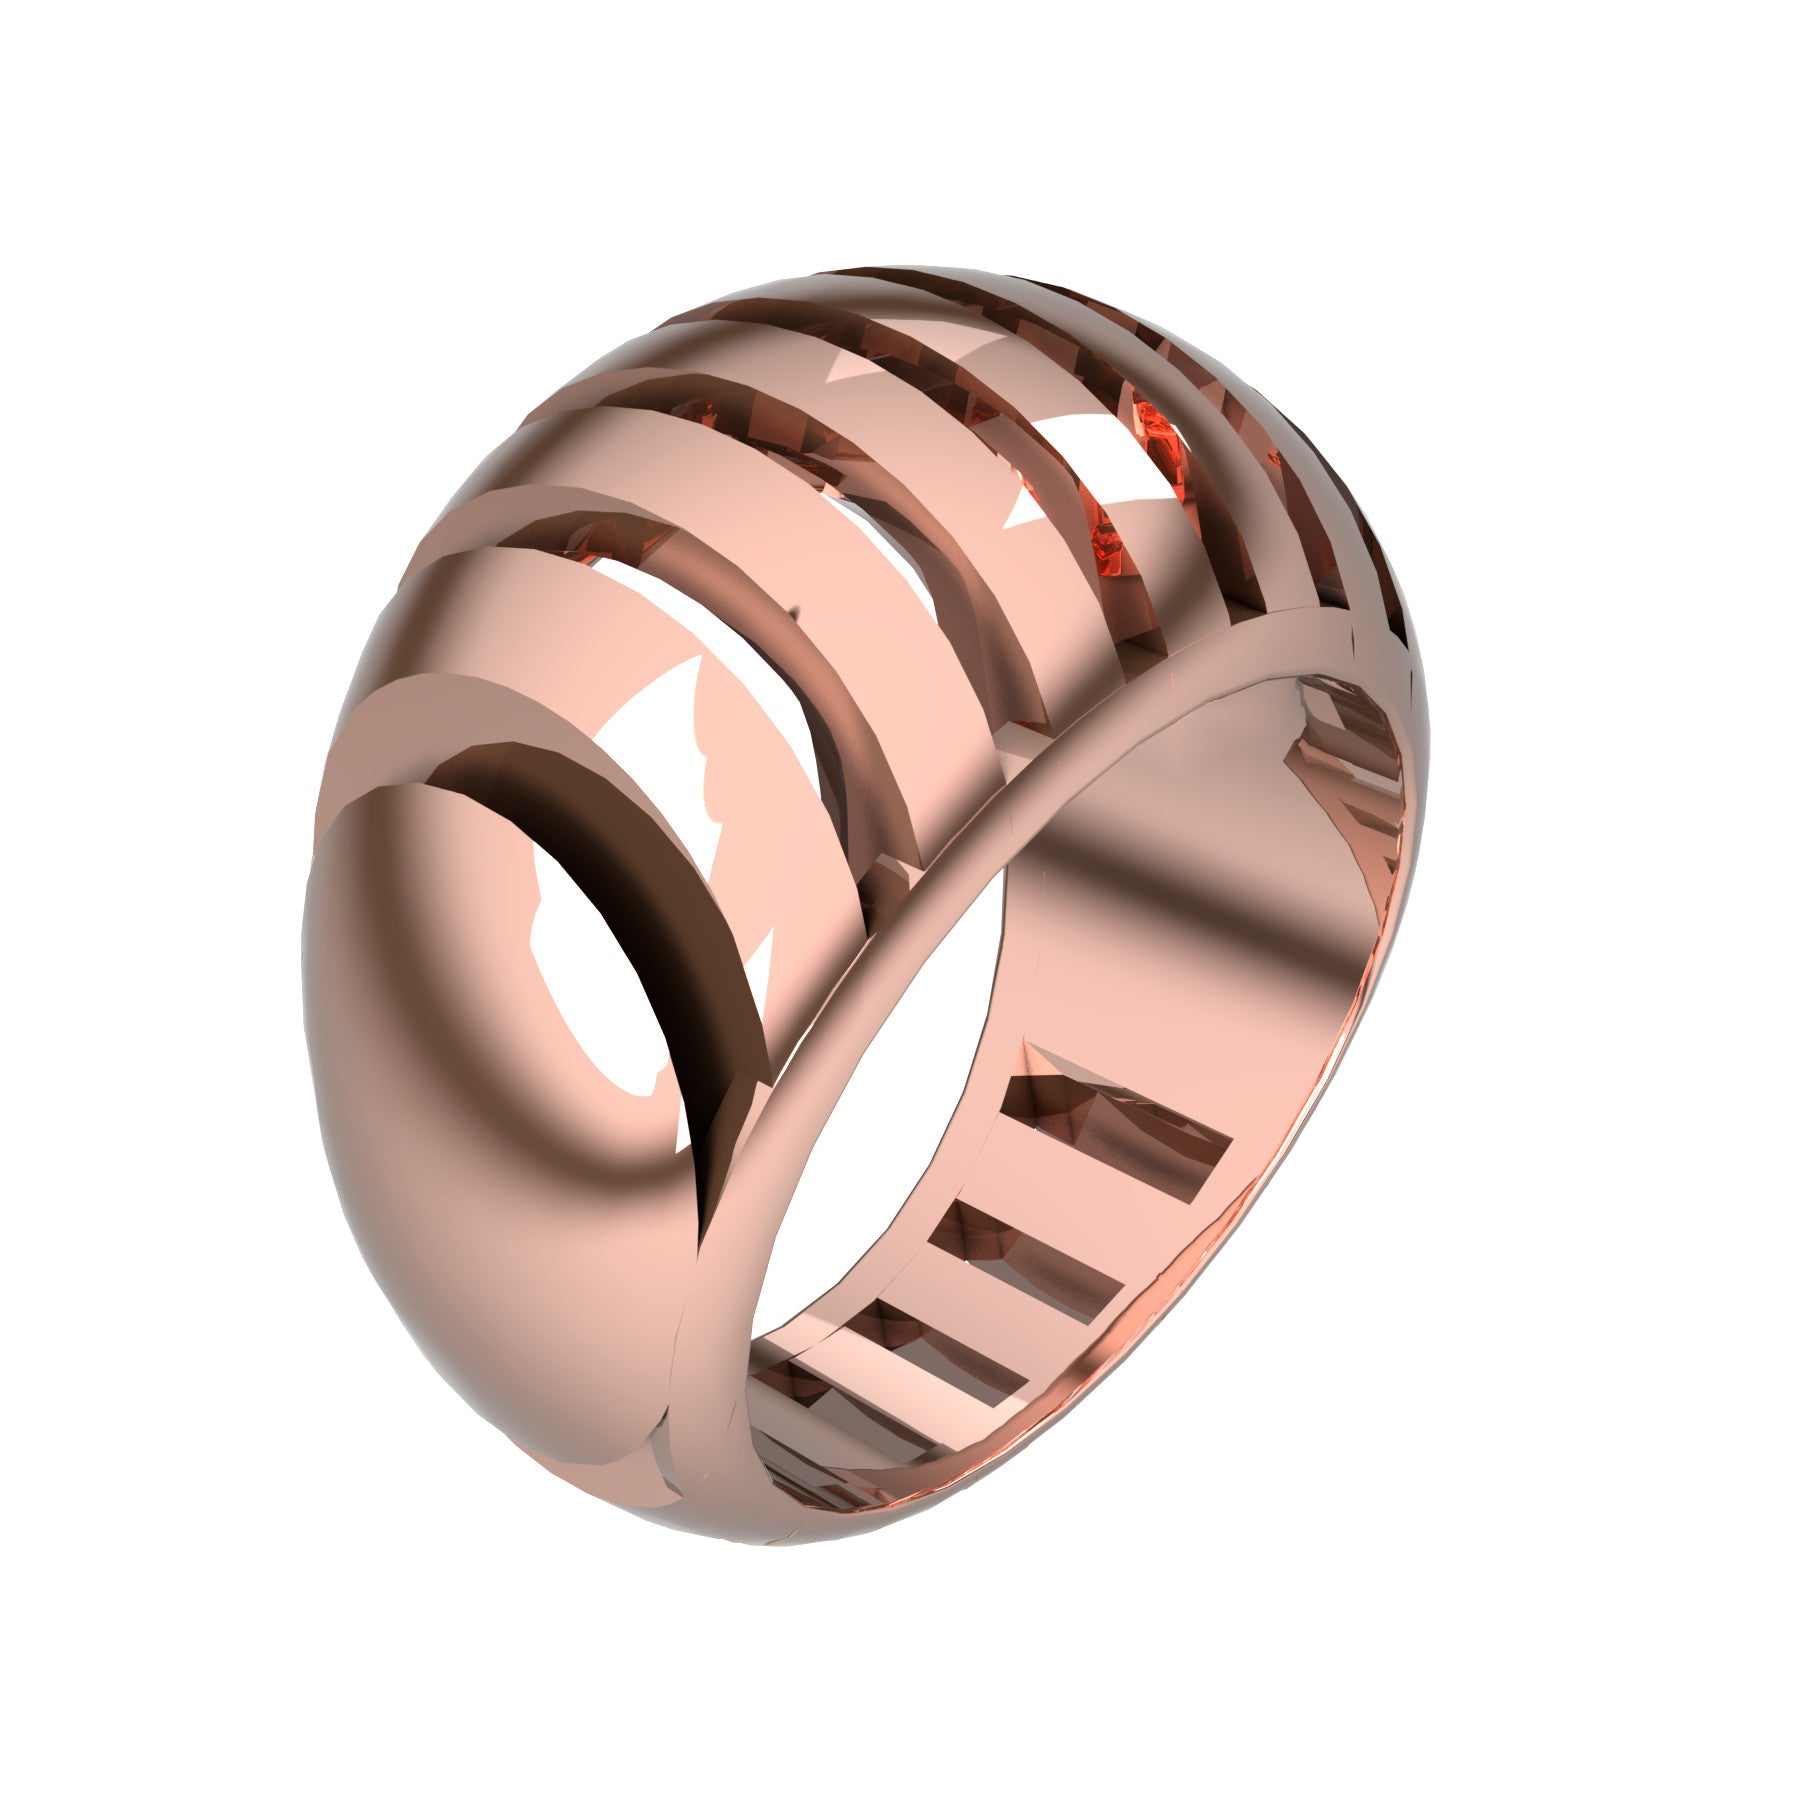 split 4 ring, 18 K pink gold, weight about 11,0 g. (0,39 oz), width 14,0 mm max